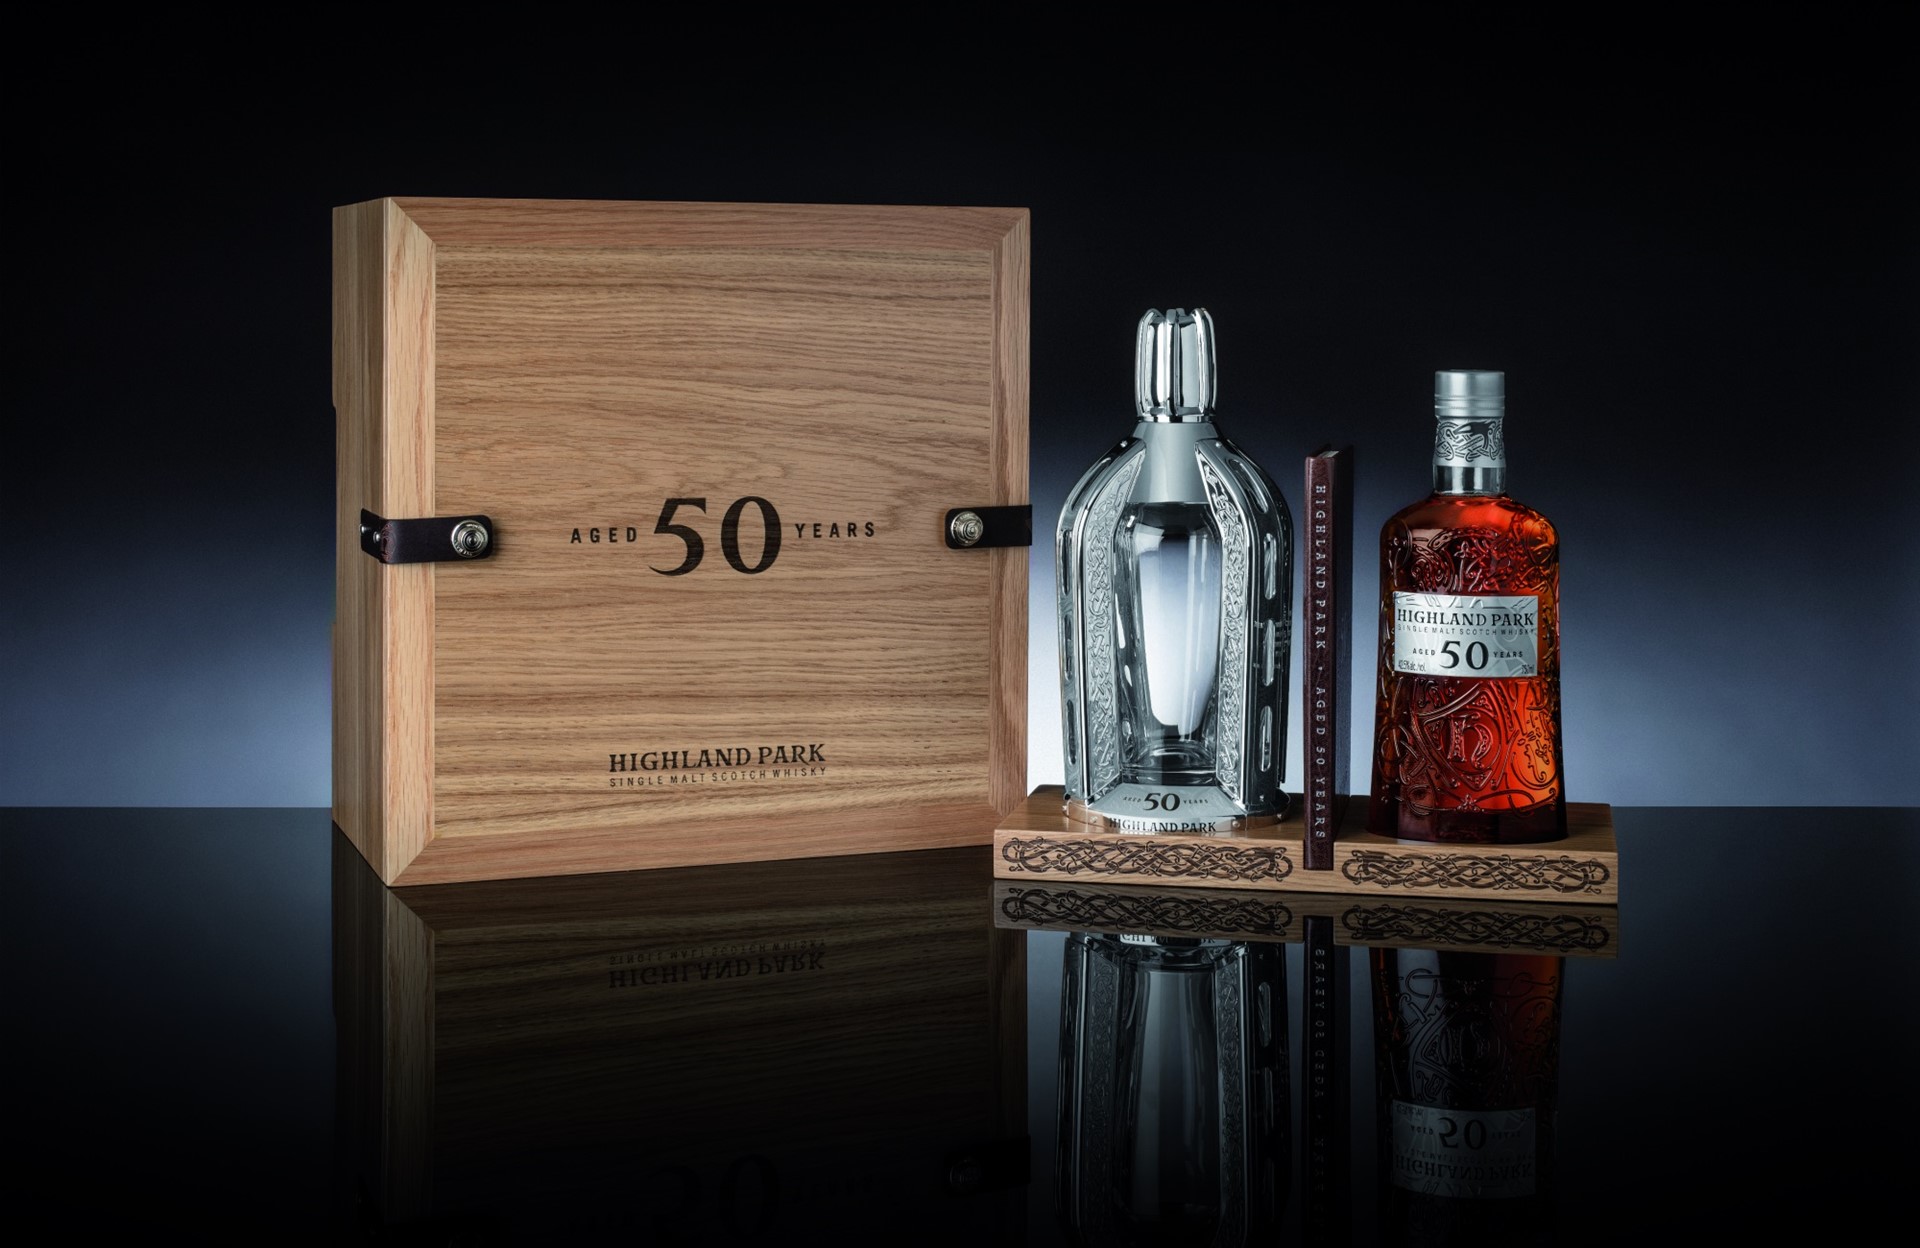 Only 274 bottles of Highland Park 50 year old were available